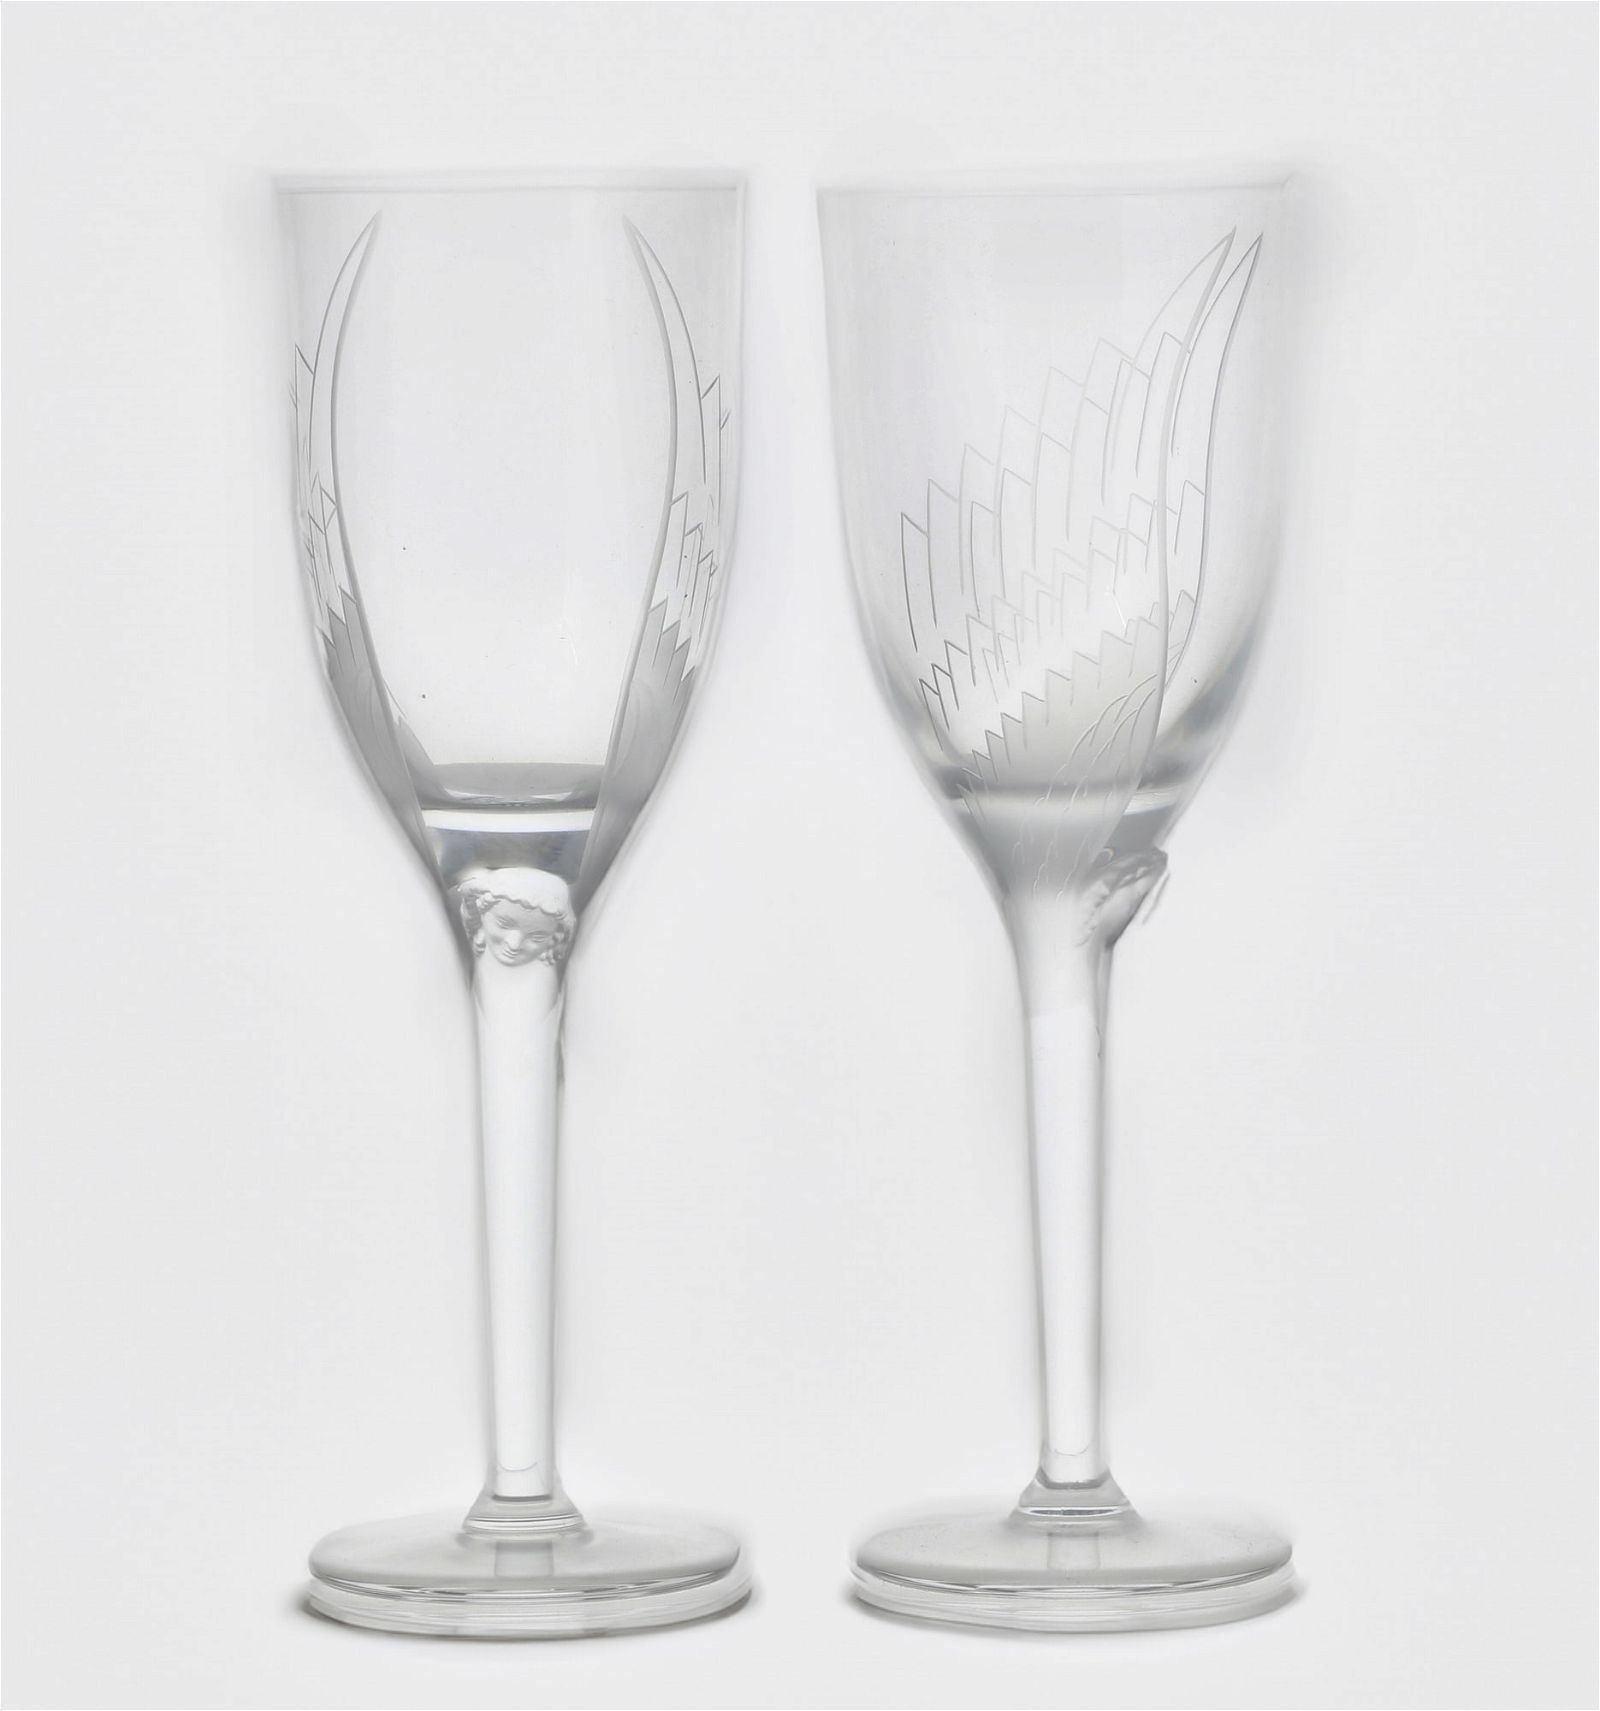 FIFTEEN LALIQUE GLASS CHAMPAGNE